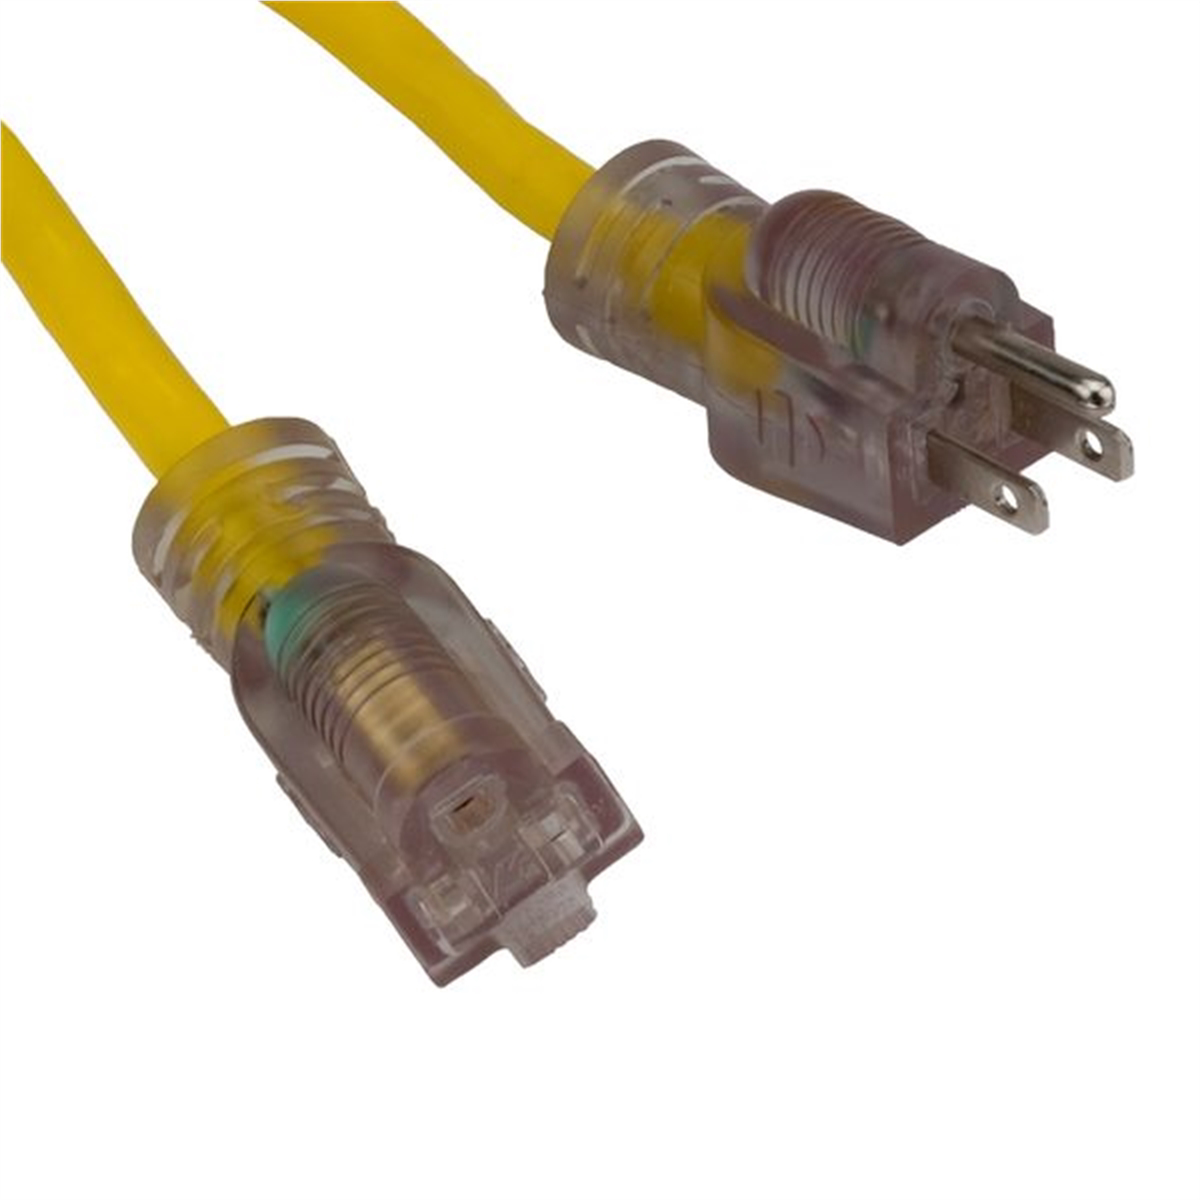 100' Single-Tap 14/3 Extension Cord